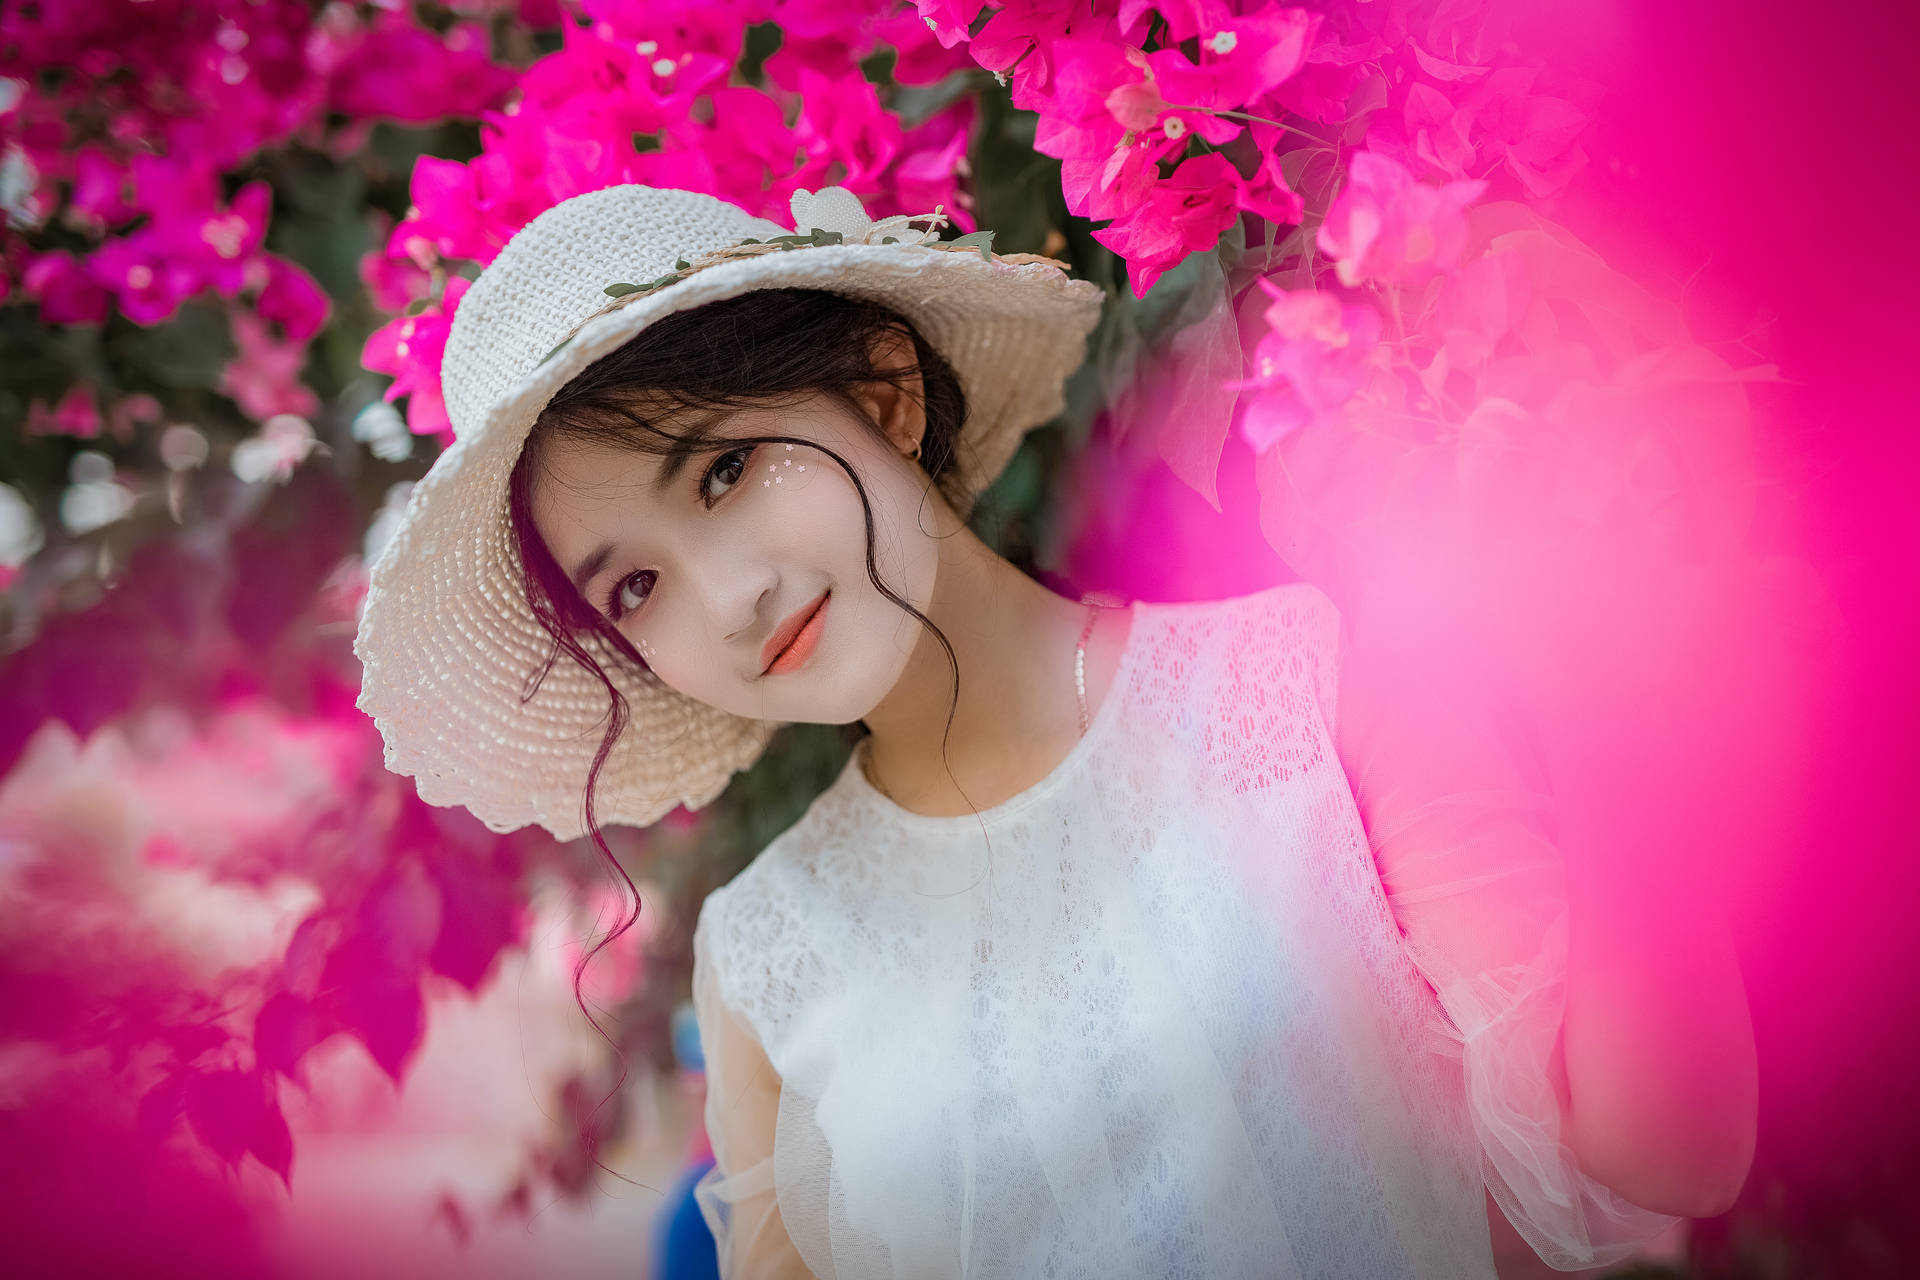 Elegance In Nature - Adorable Girl With Floral Hat Wallpaper